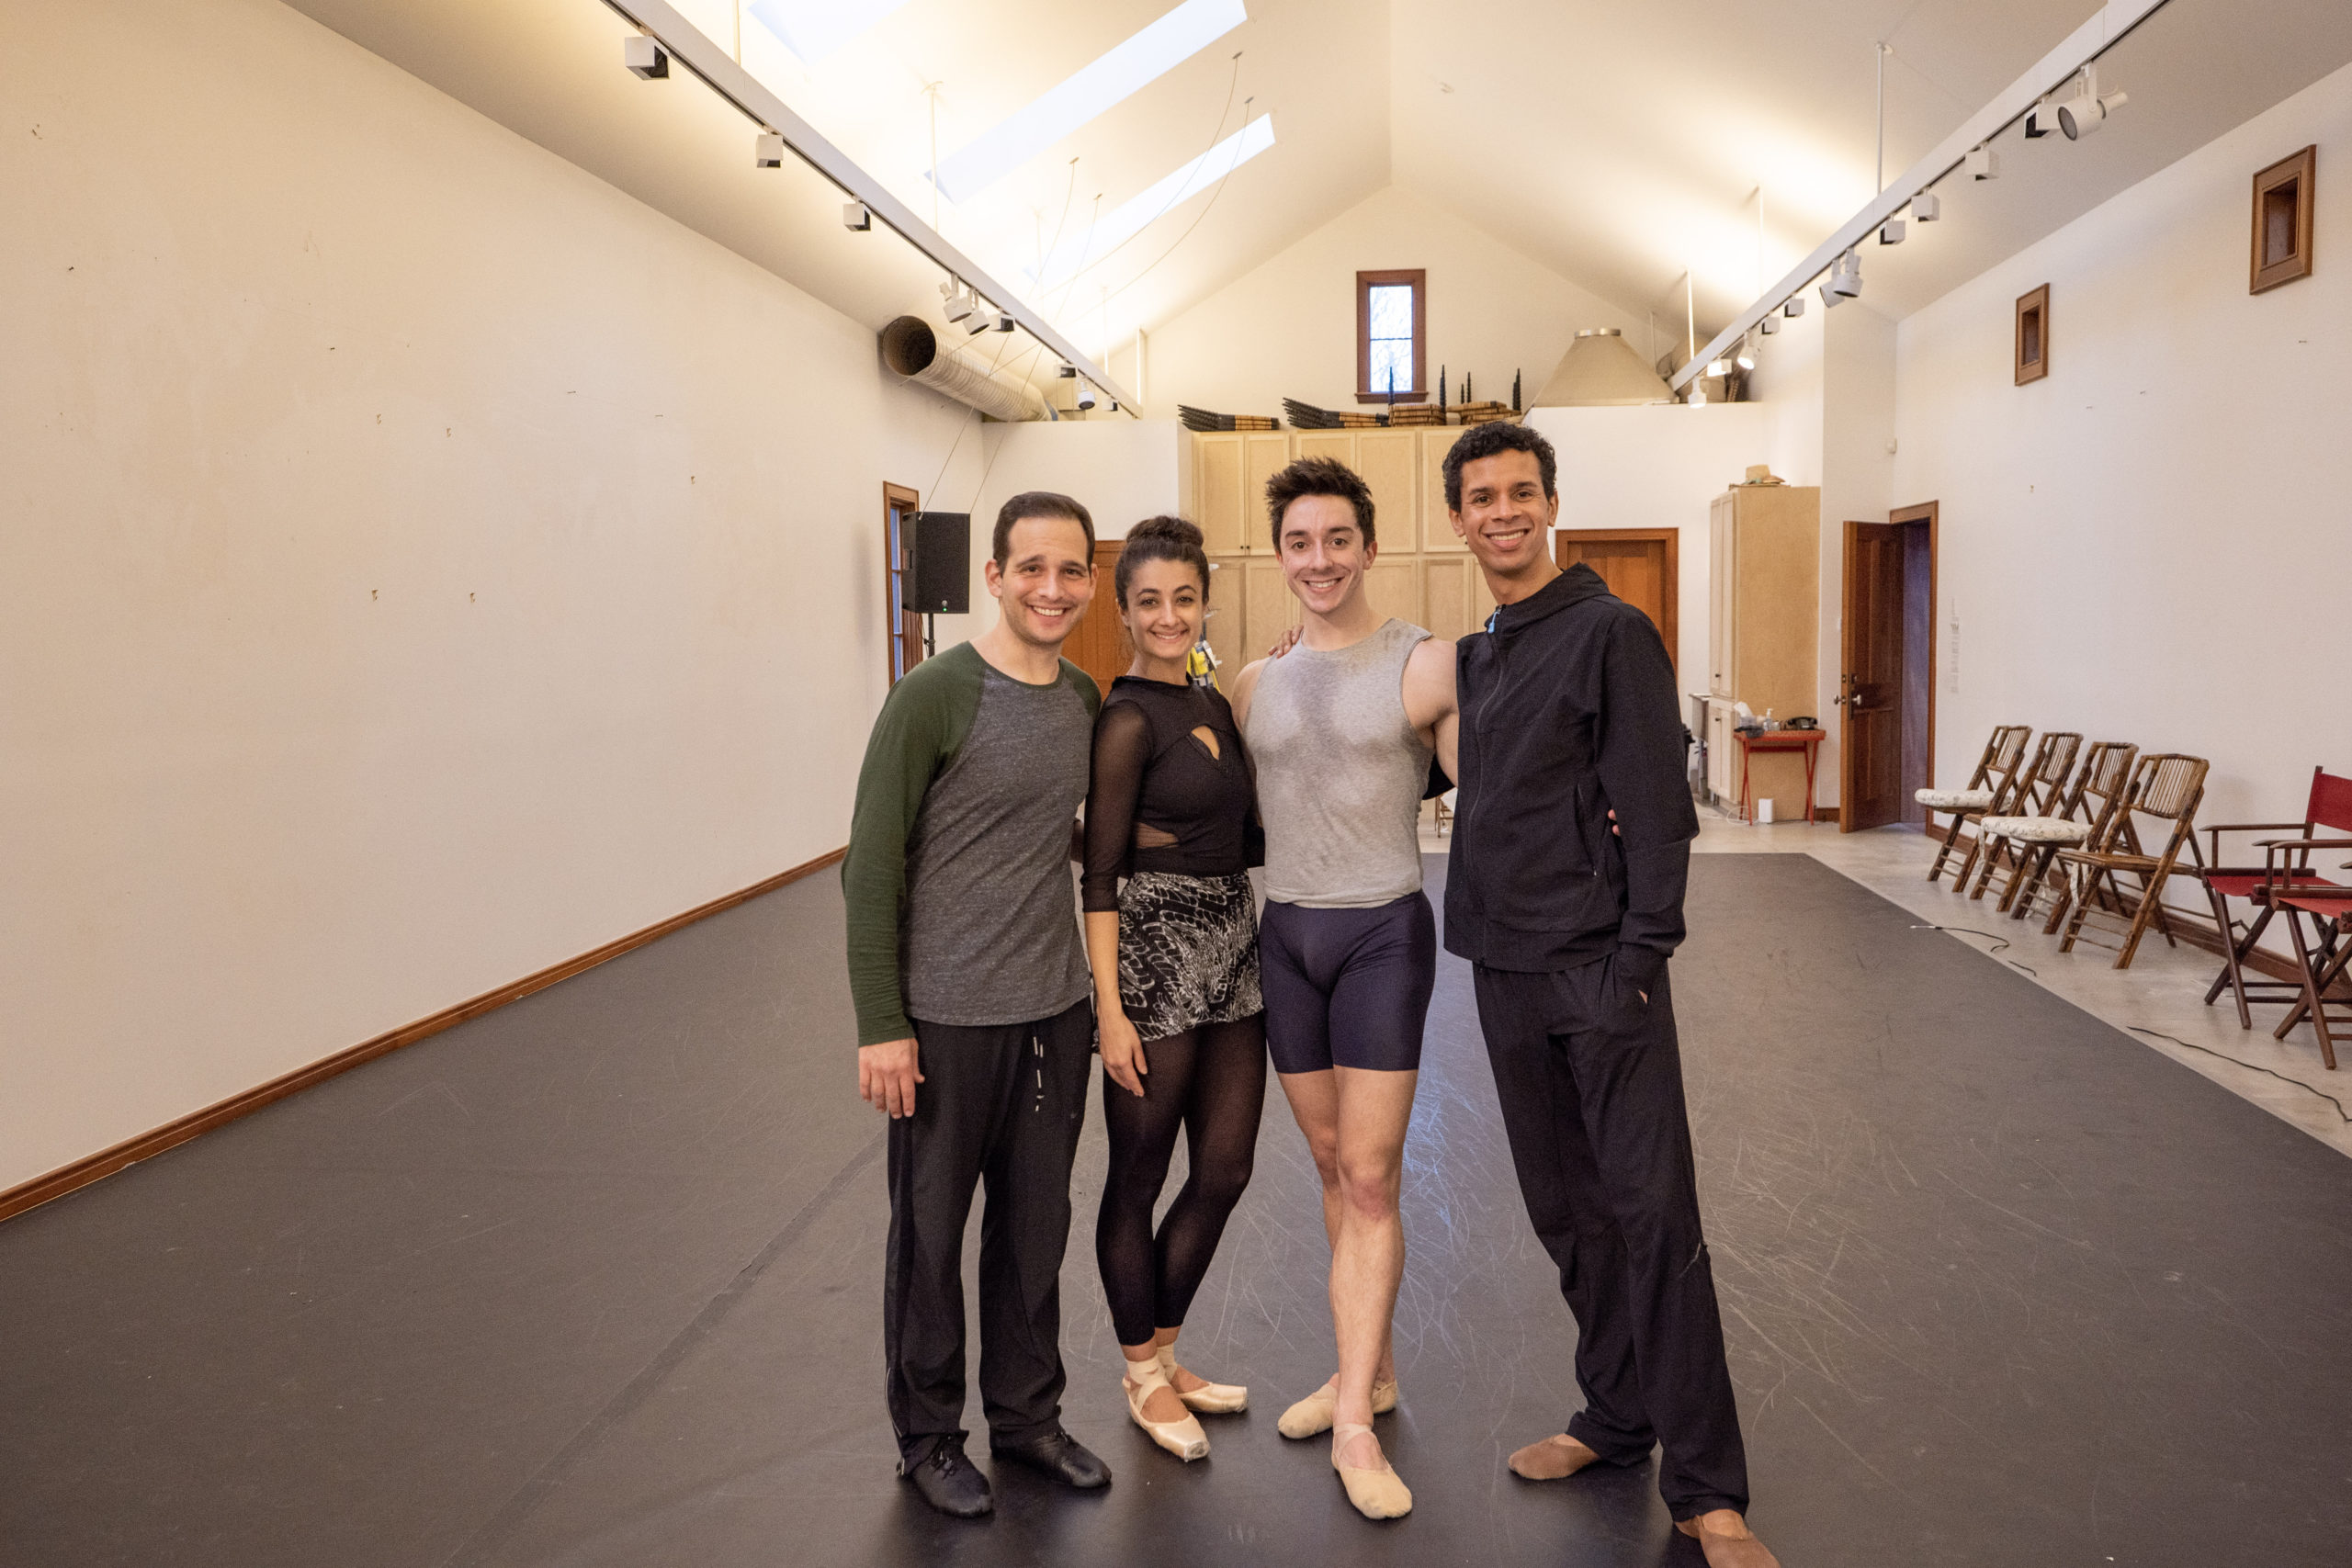 Hamptons Dance Project in rehearsal at the Guild Hall William P. Rayner Artist-in-Residence studio. From left, Craig Salstein, Lauren Bonfiglio, Tyler Maloney and Jose Sebastian. © JOE BRONDO FOR GUILD HALL